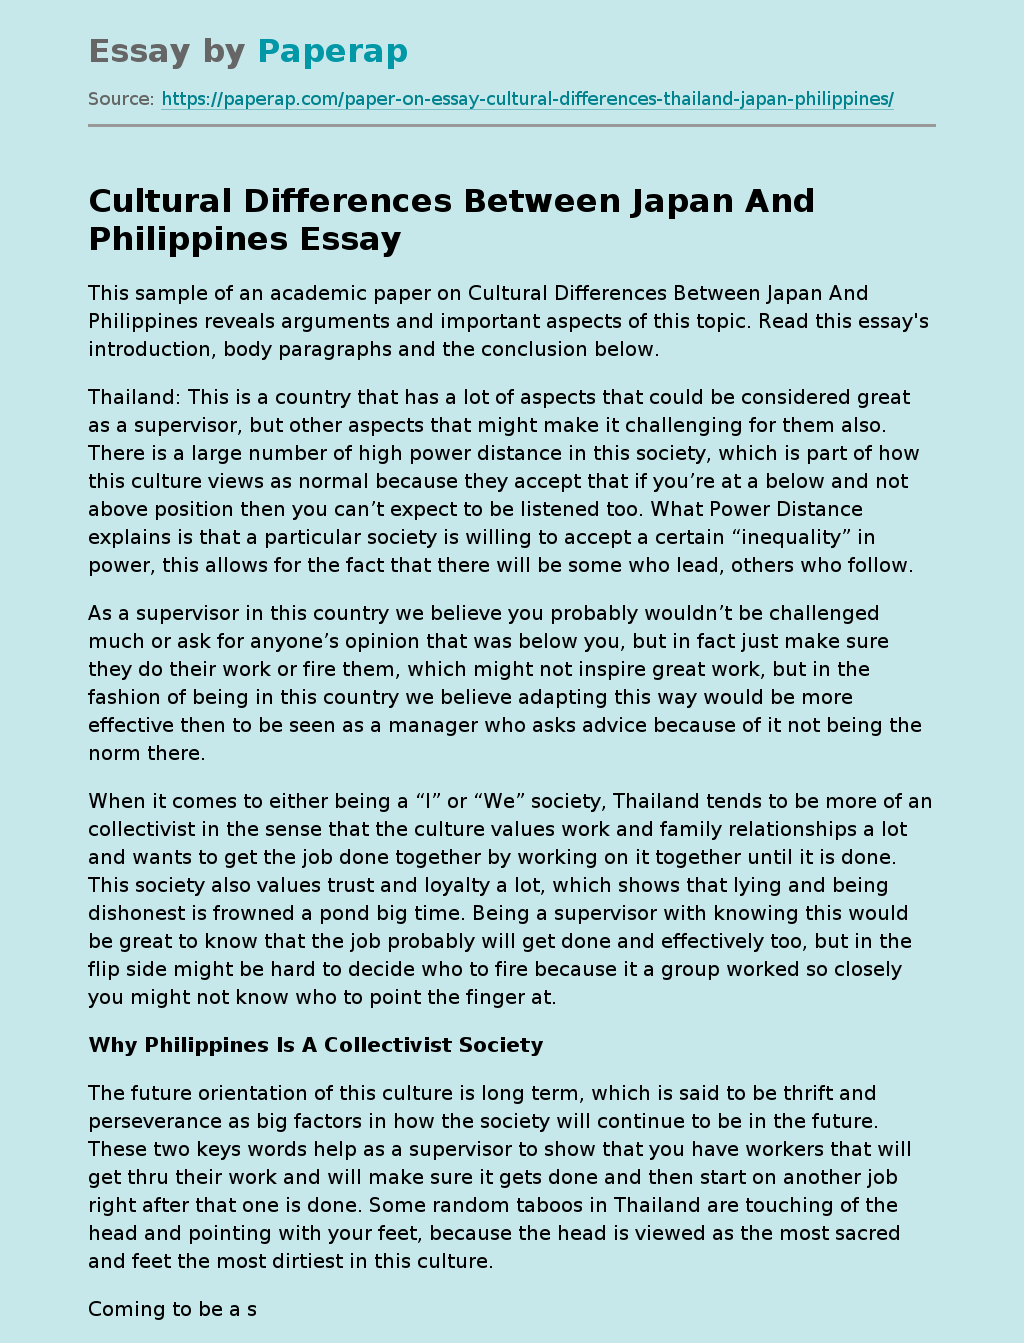 Cultural Differences Between Japan And Philippines